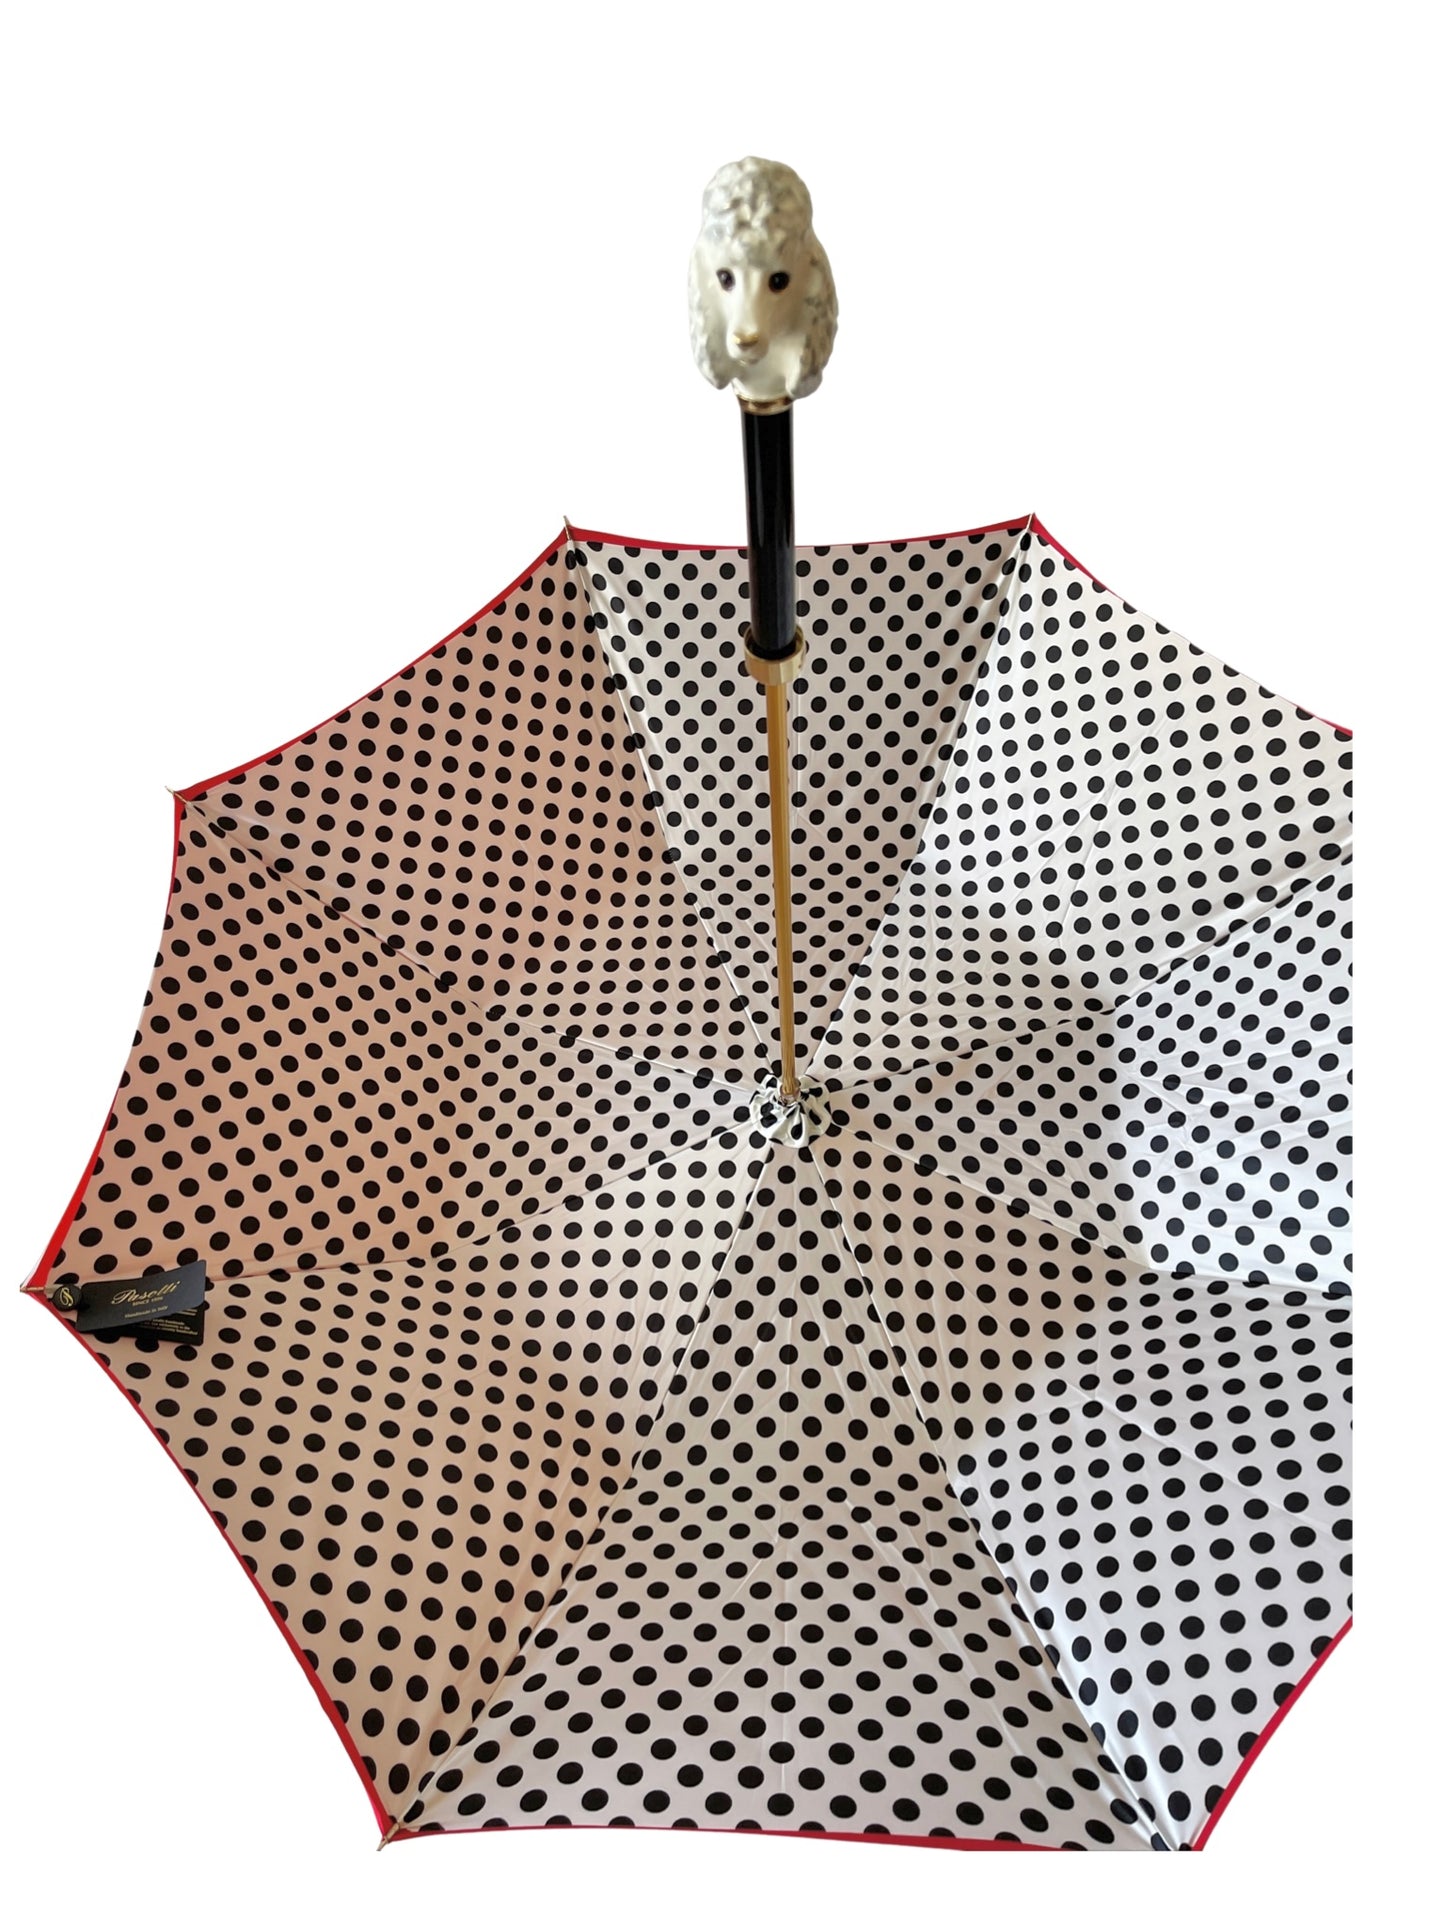 Poodle Handle Umbrella with Red Dome and Polka Dots